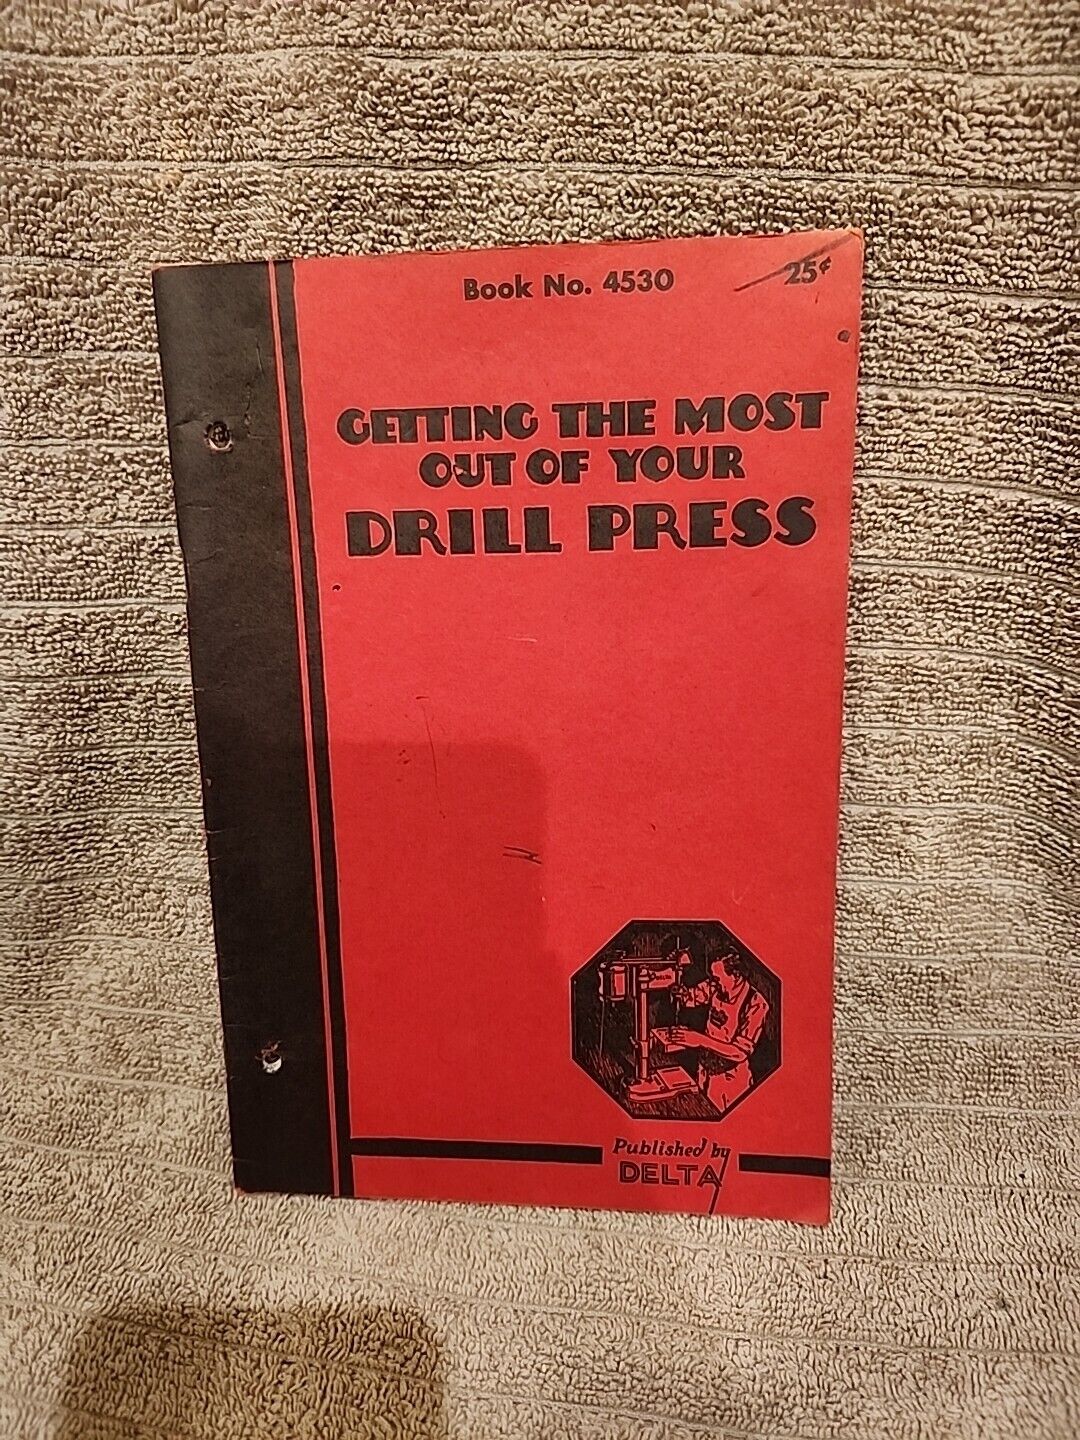 Genuine 1937 Delta Milwaukee 4530 Getting The Most Out Of Your Drill Press Book